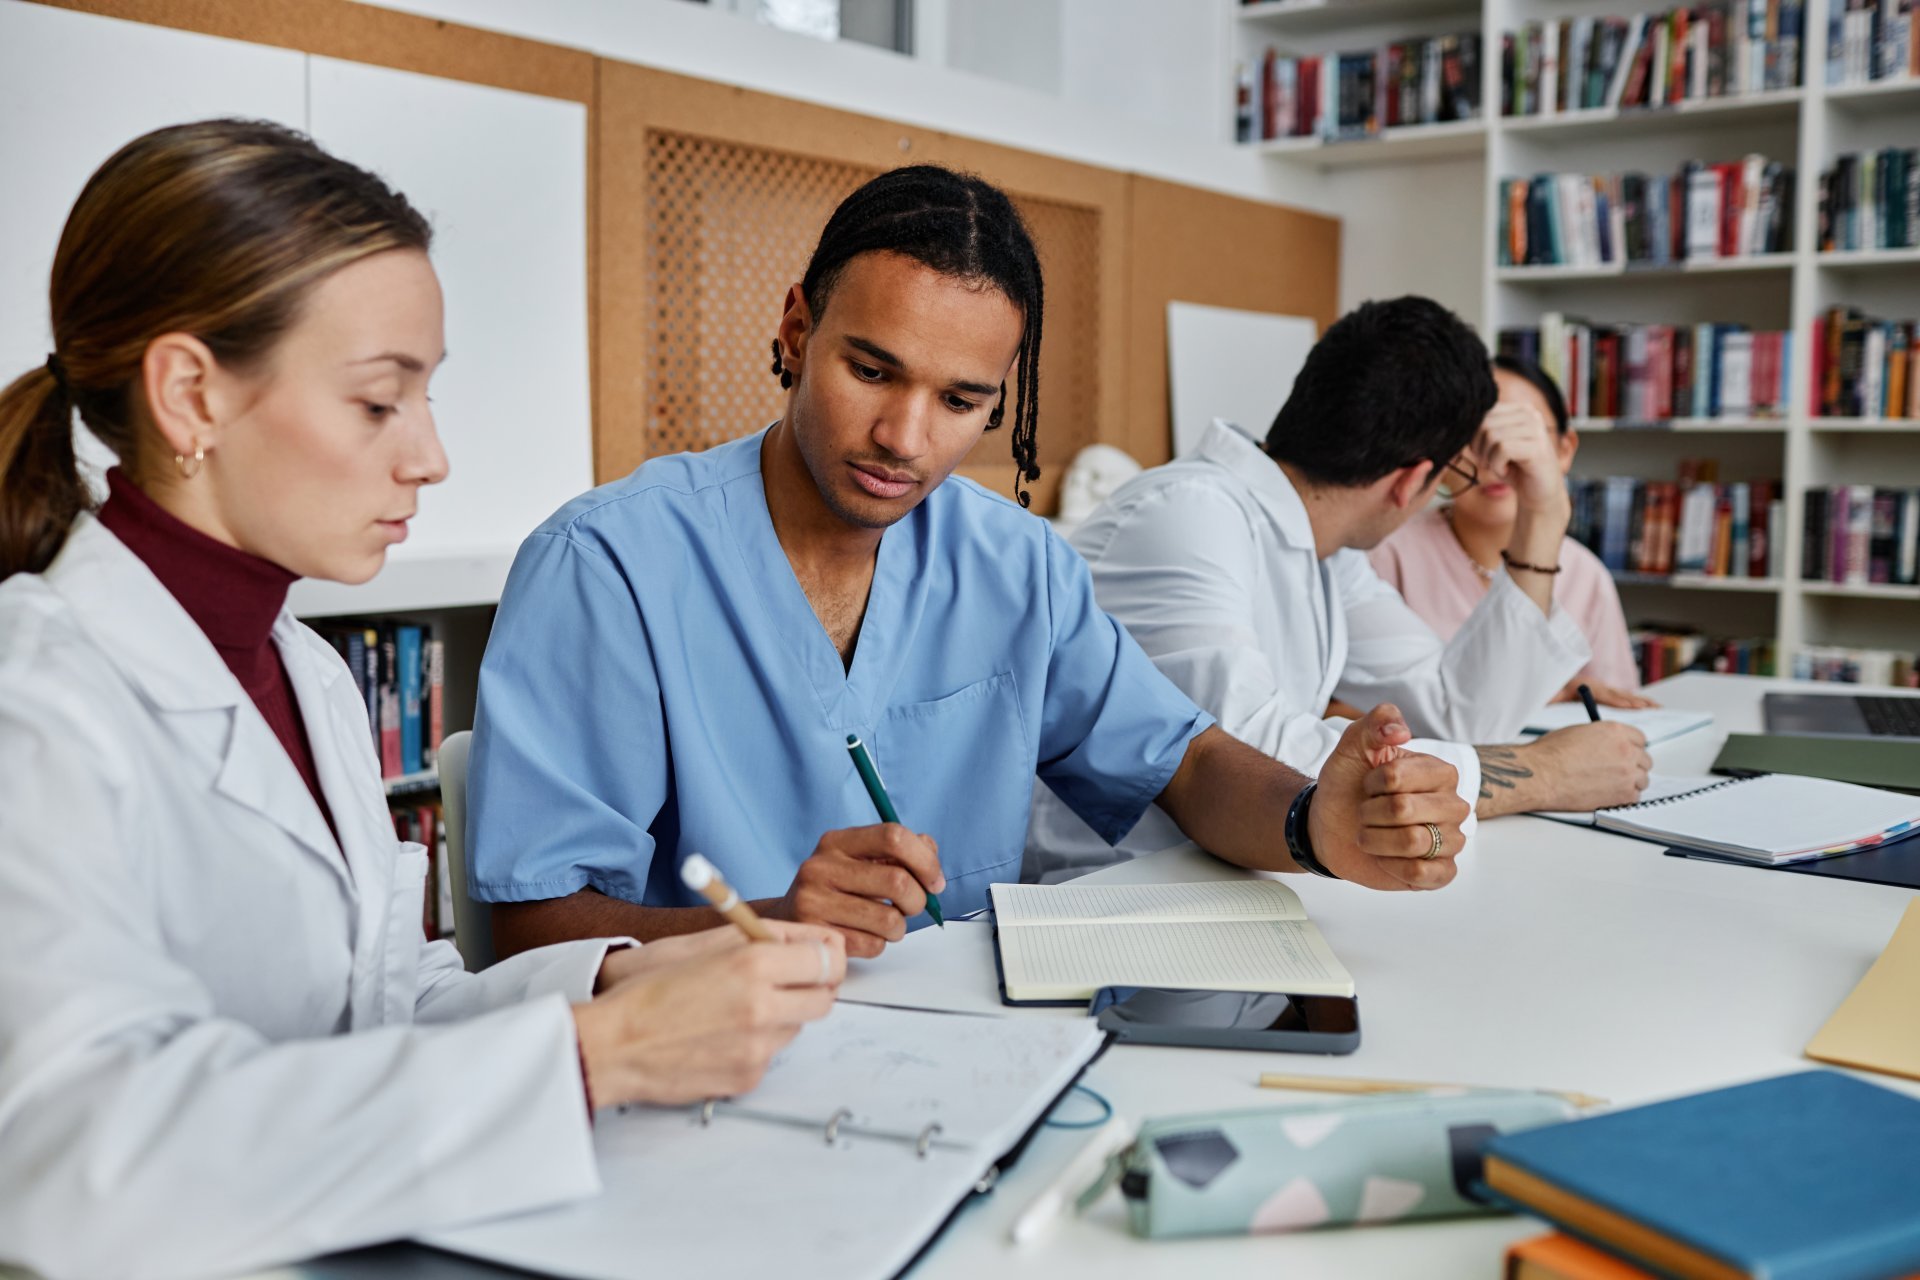 Continuing education is a vital part of a successful allied health professional's career.